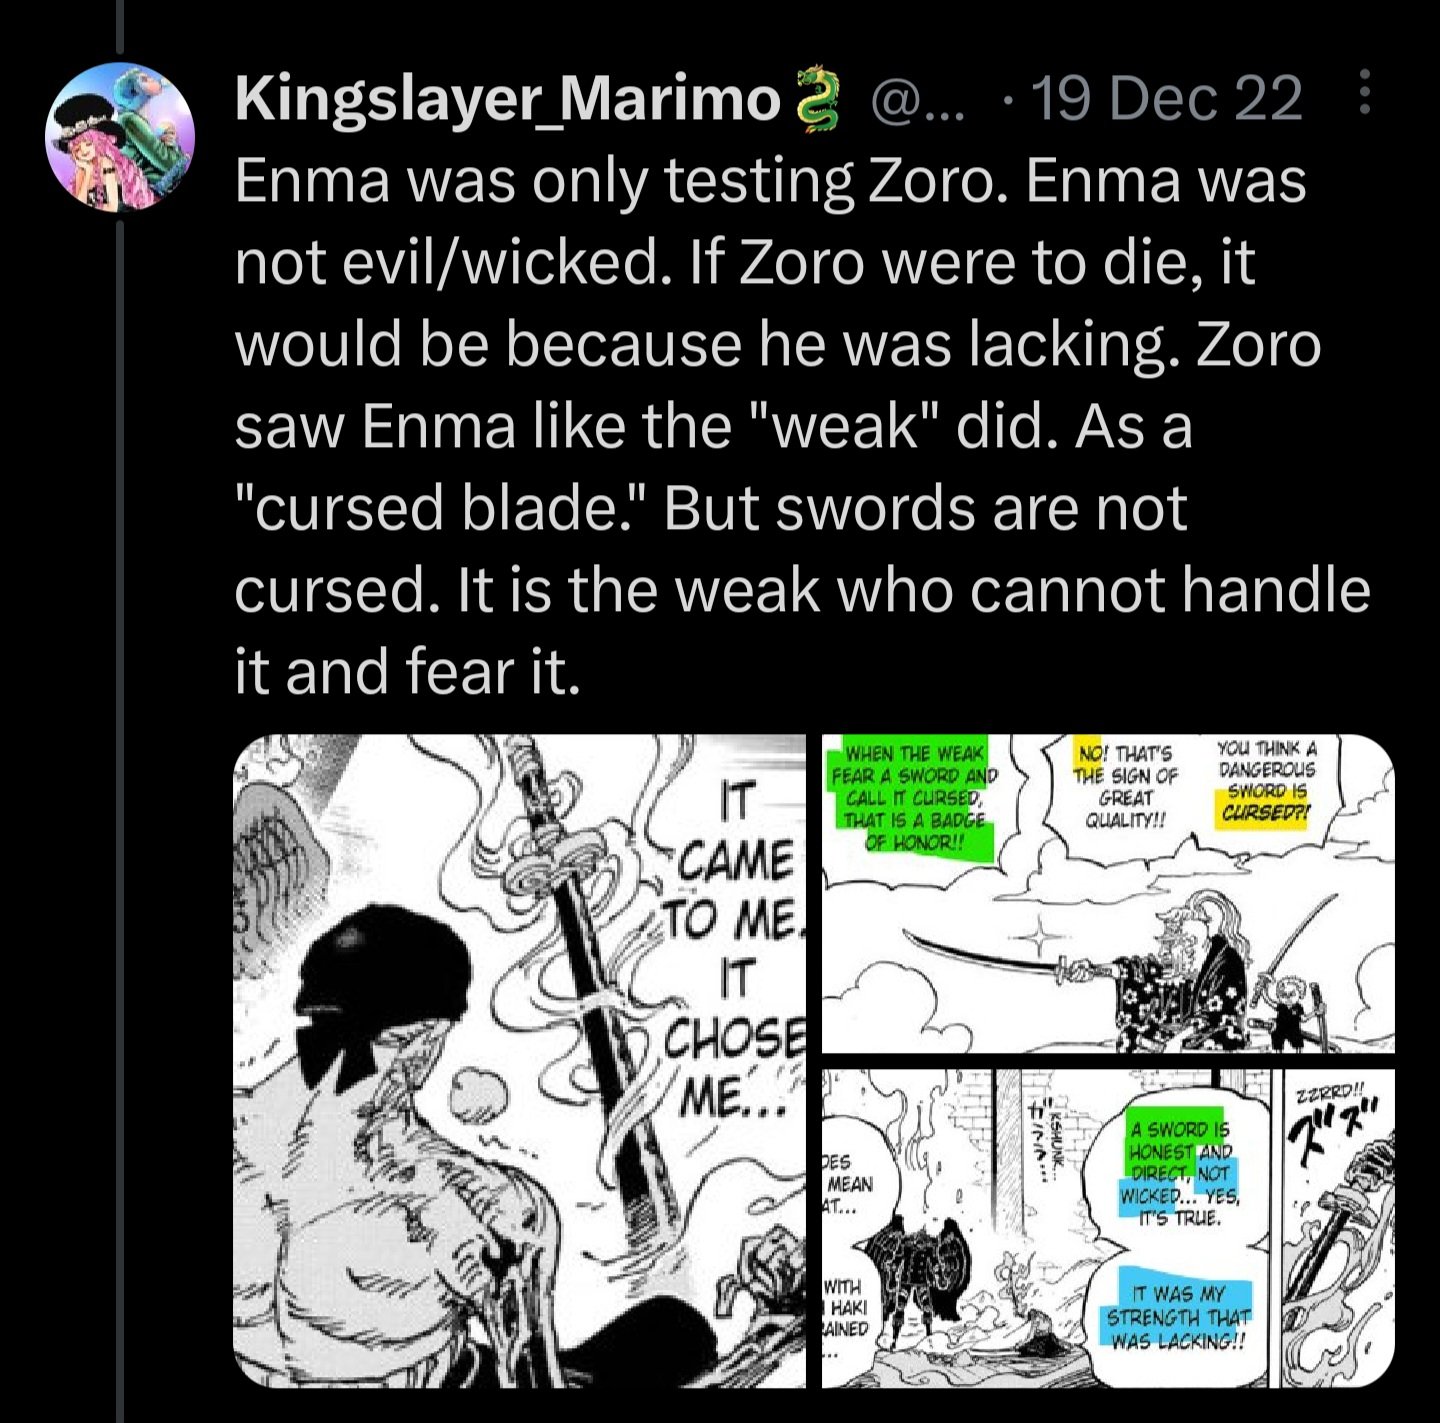 Kingslayer_Marimo🐉 on X: Hopefully this helps explain why Zoro tamed Enma.  Zoro states Enma is testing him. During the King fight (when Zoro gave all  his haki) Zoro was going THROUGH Enma's